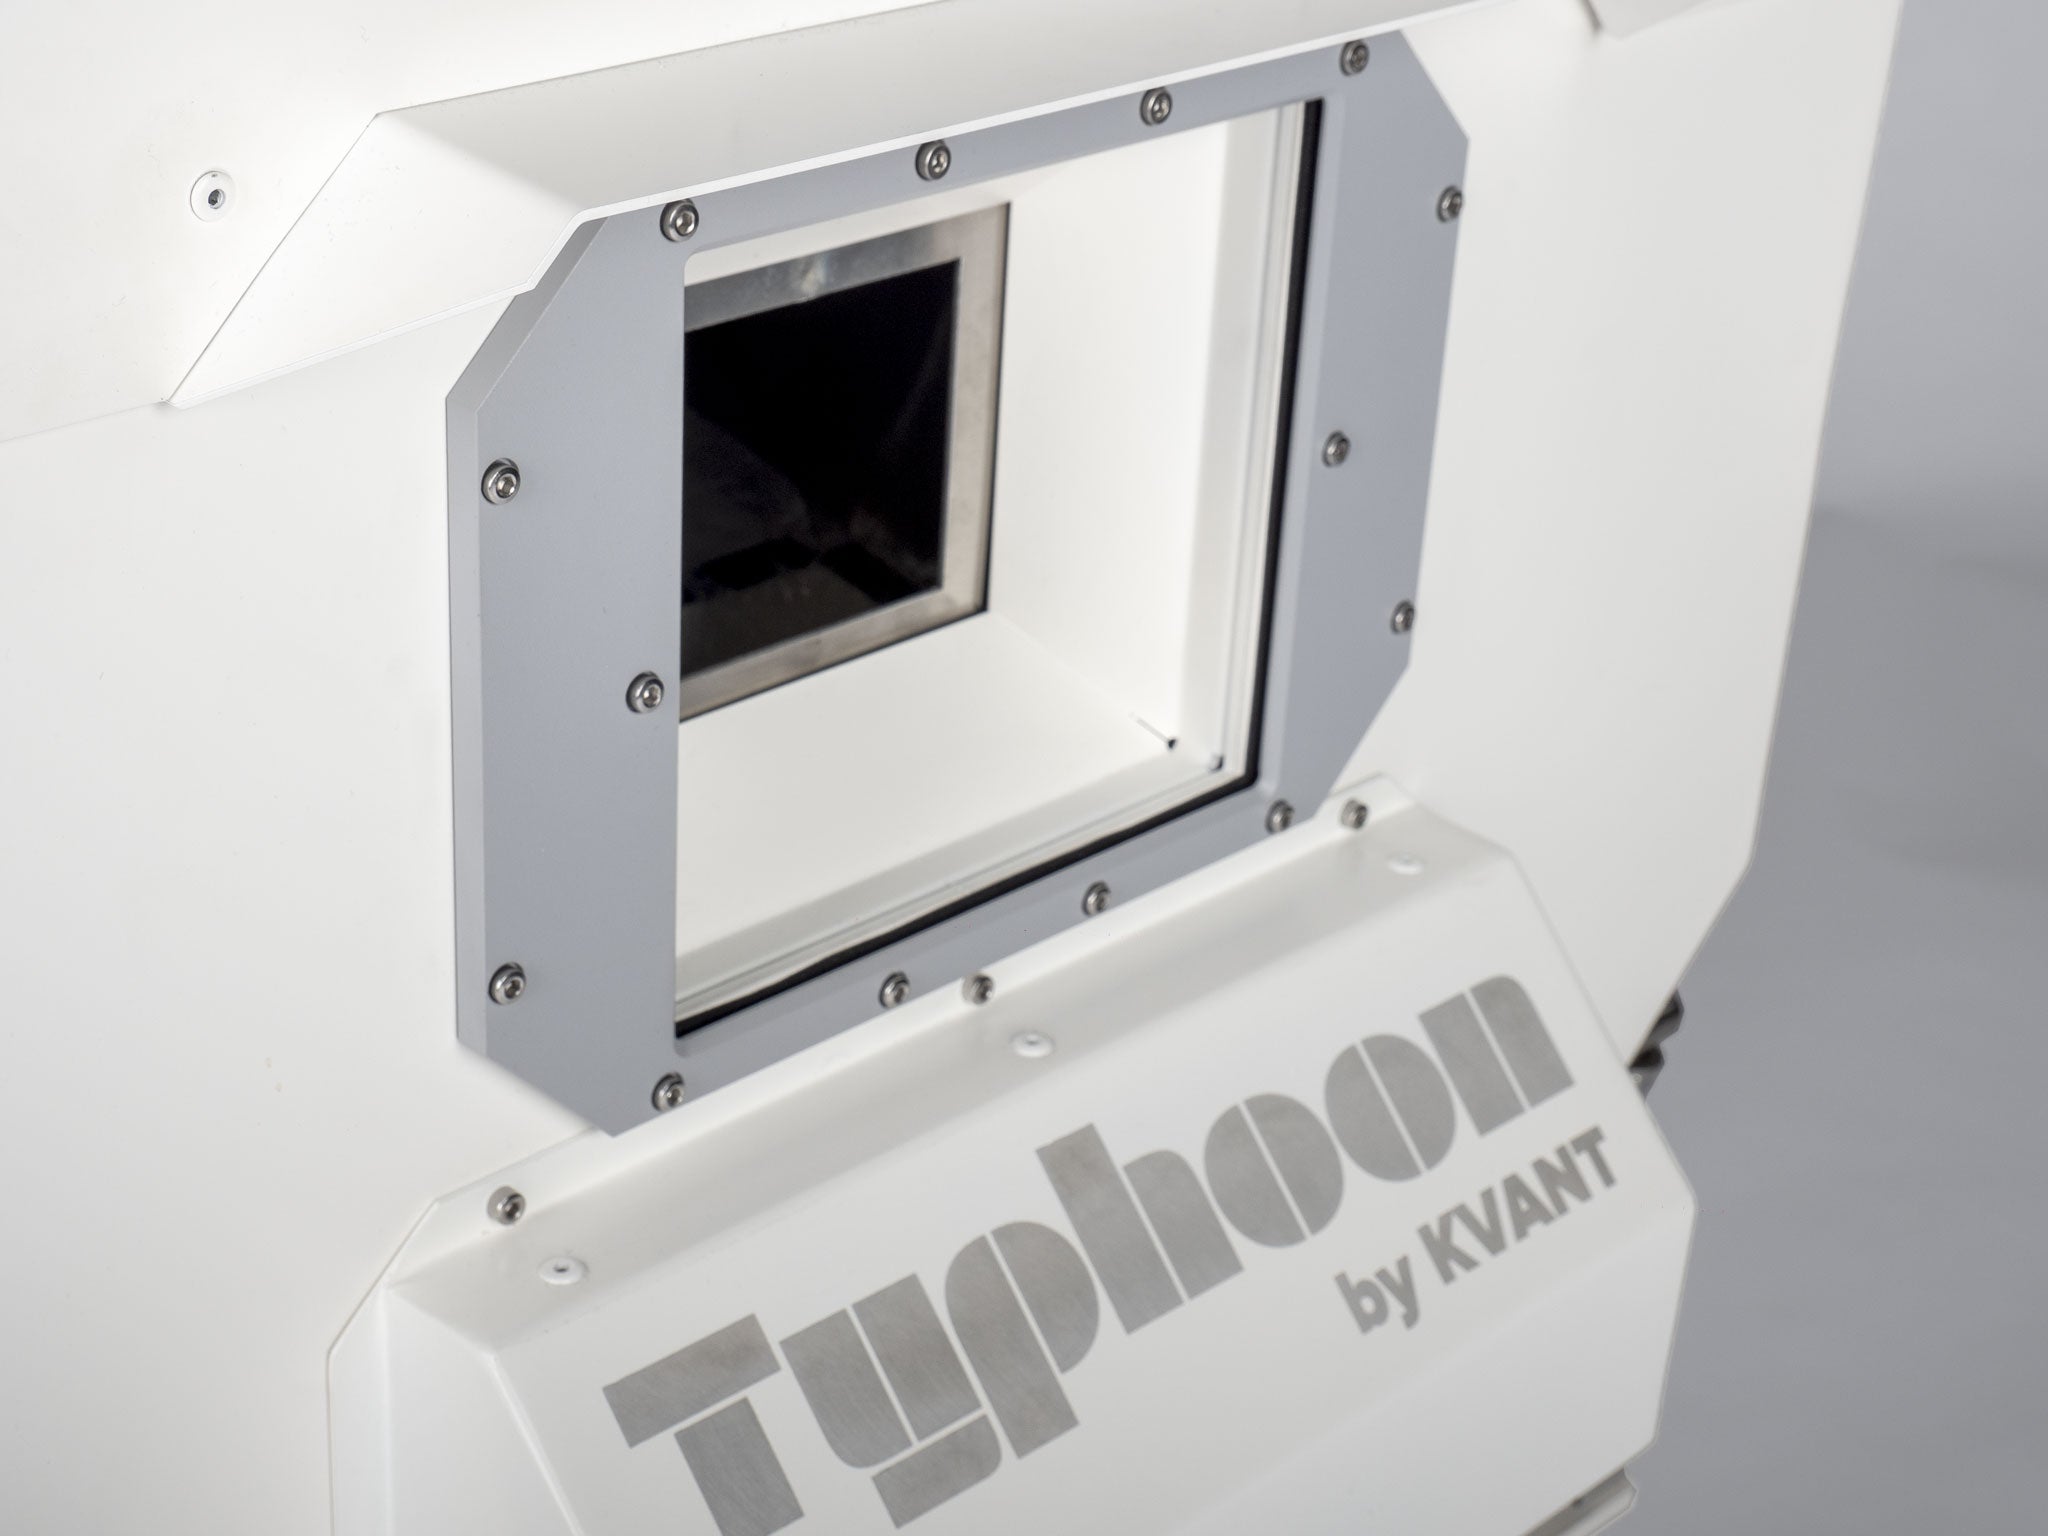 Outdoor IP65 Typhoon enclosure/housing for protection of lasers and delicate equipment in harsh weather_3